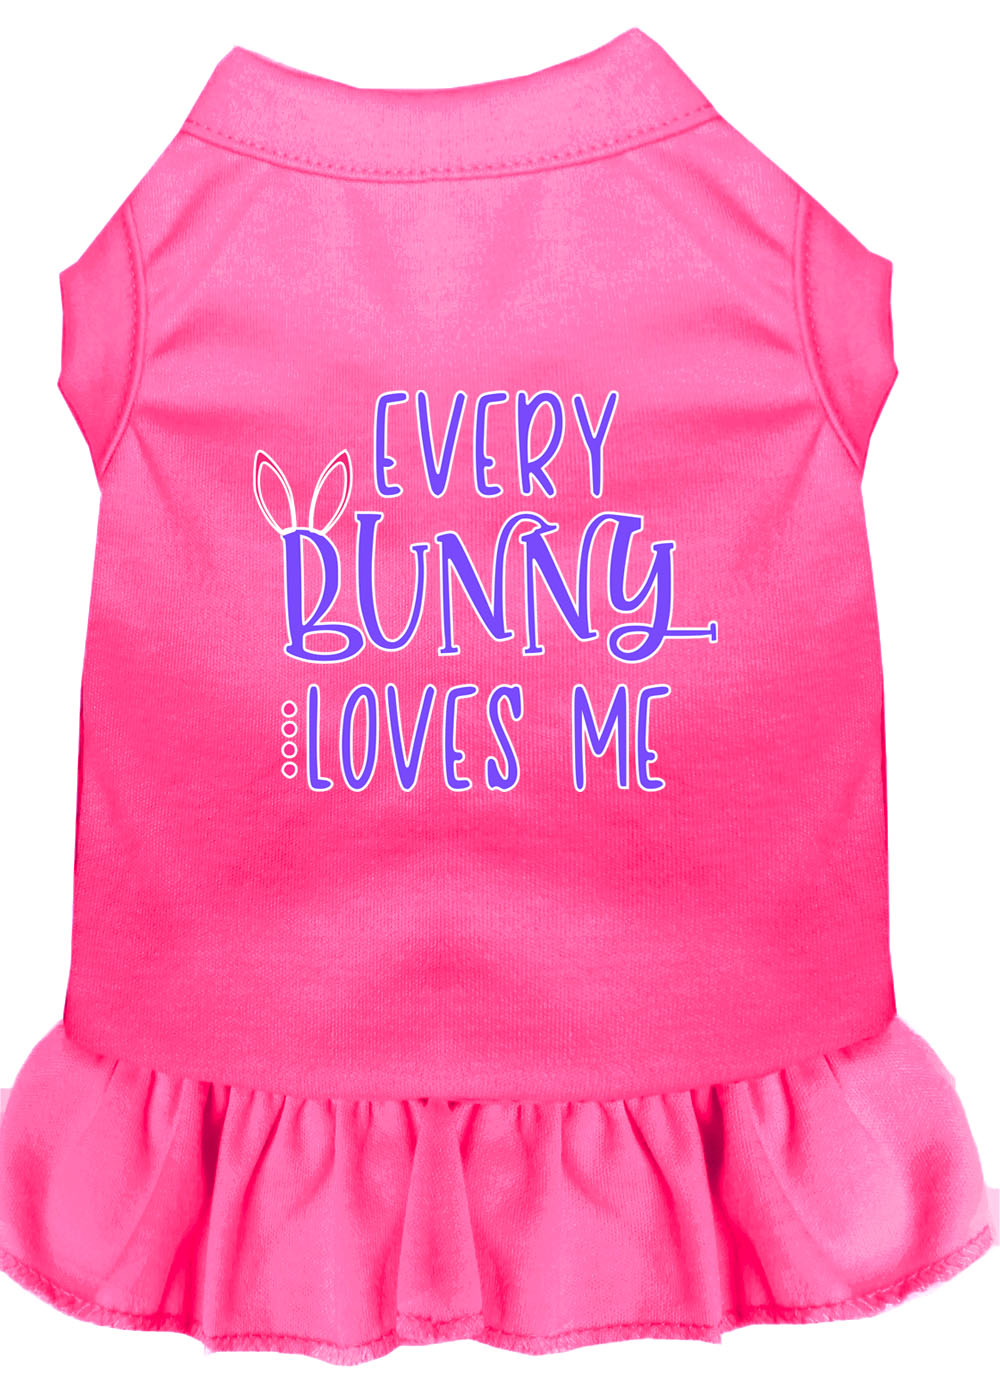 Every Bunny Loves me Screen Print Dog Dress Bright Pink XL